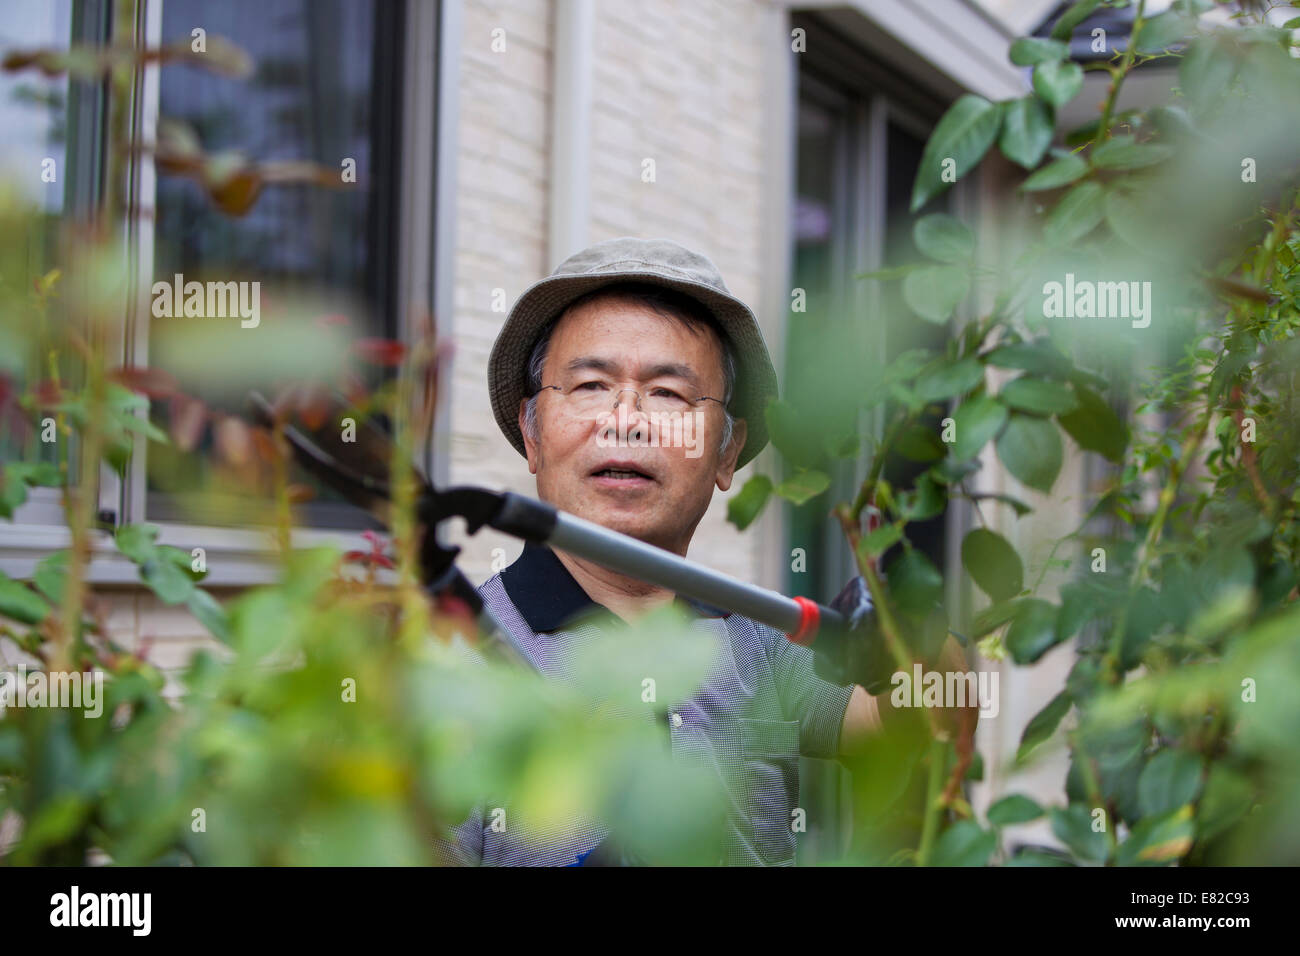 A man working in his garden. Stock Photo